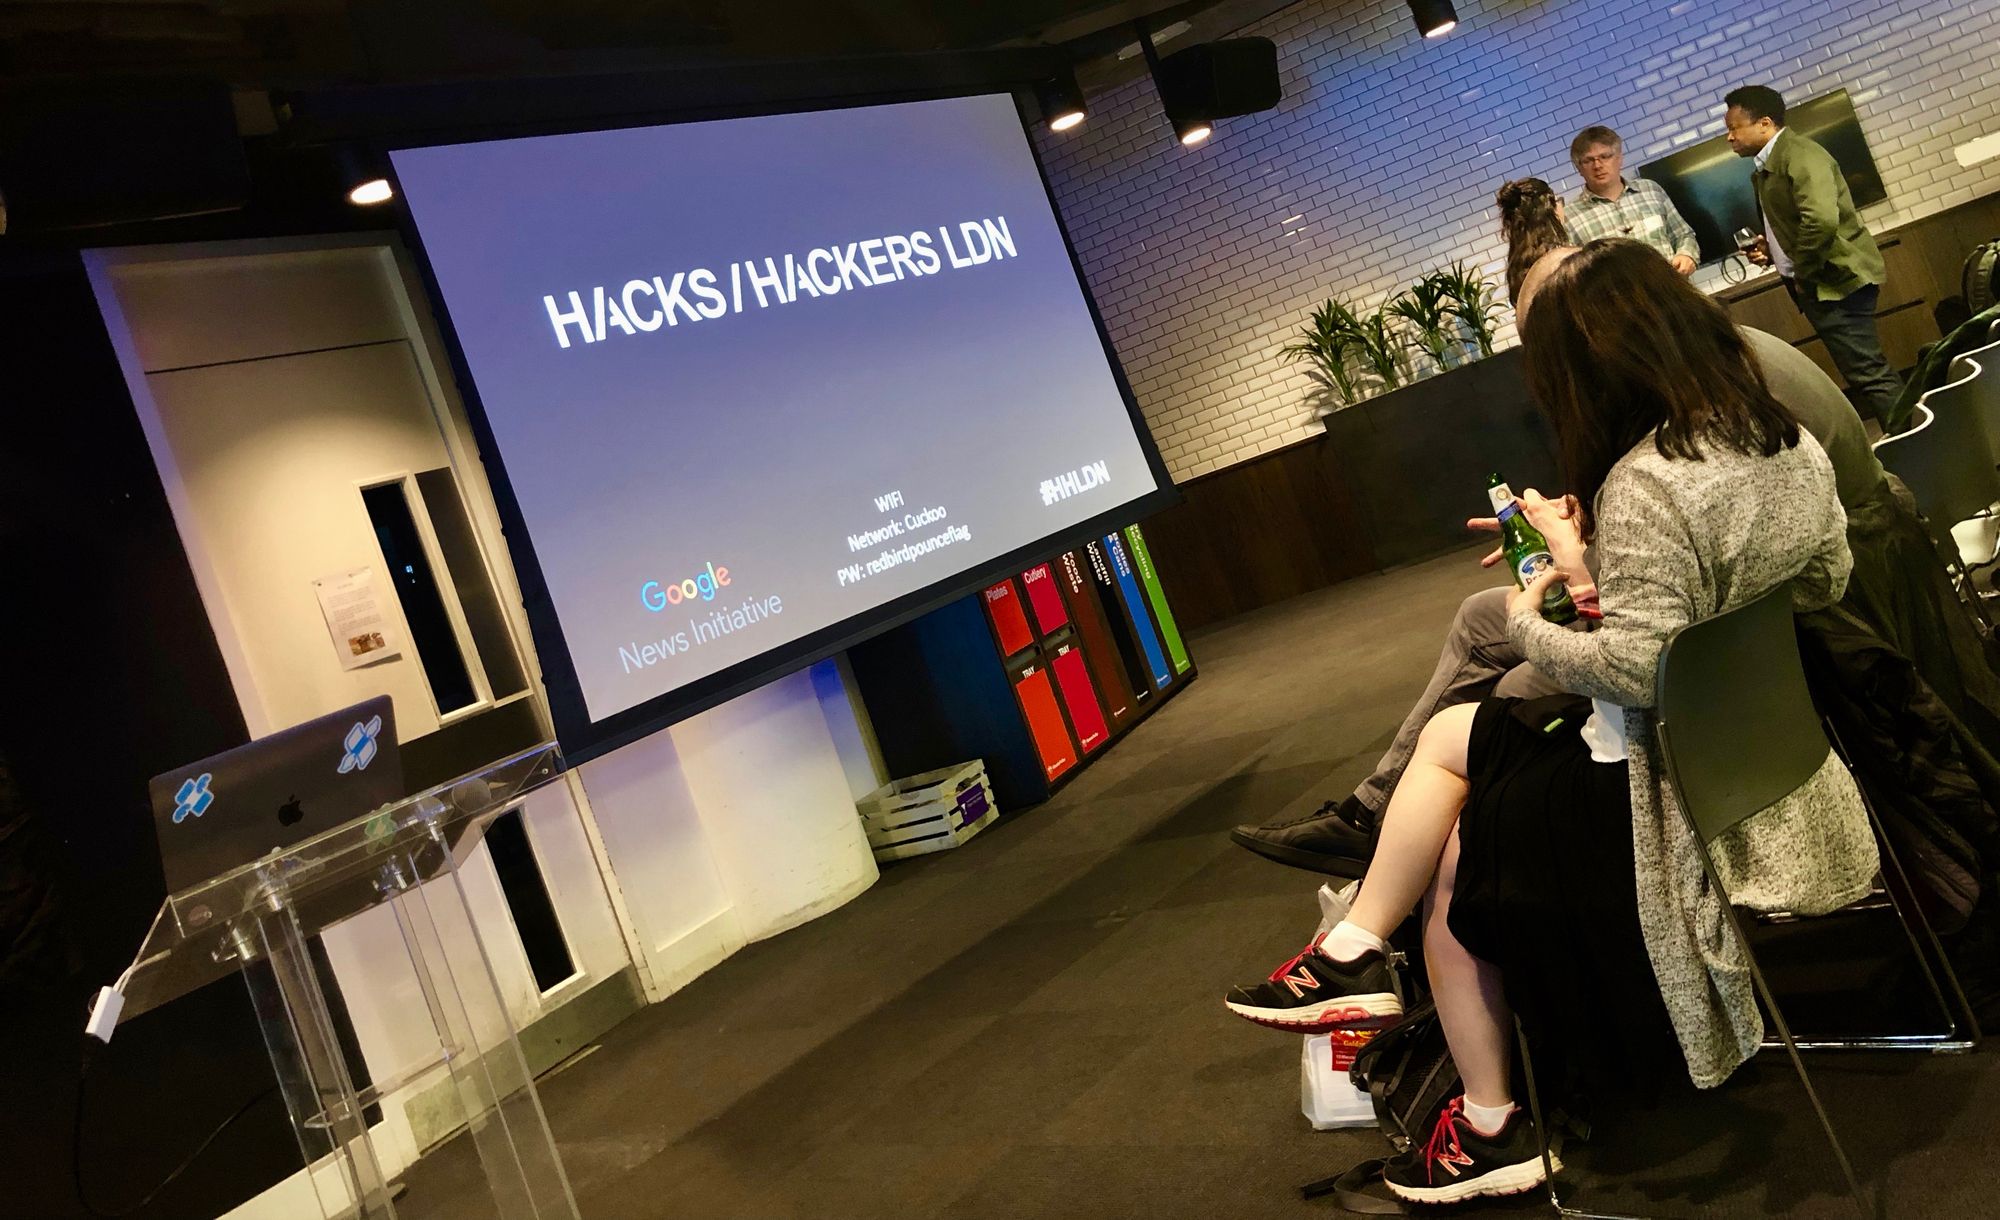 Hacks/Hackers London: News for millennial investors, engaged journalism and data leakage to Facebook